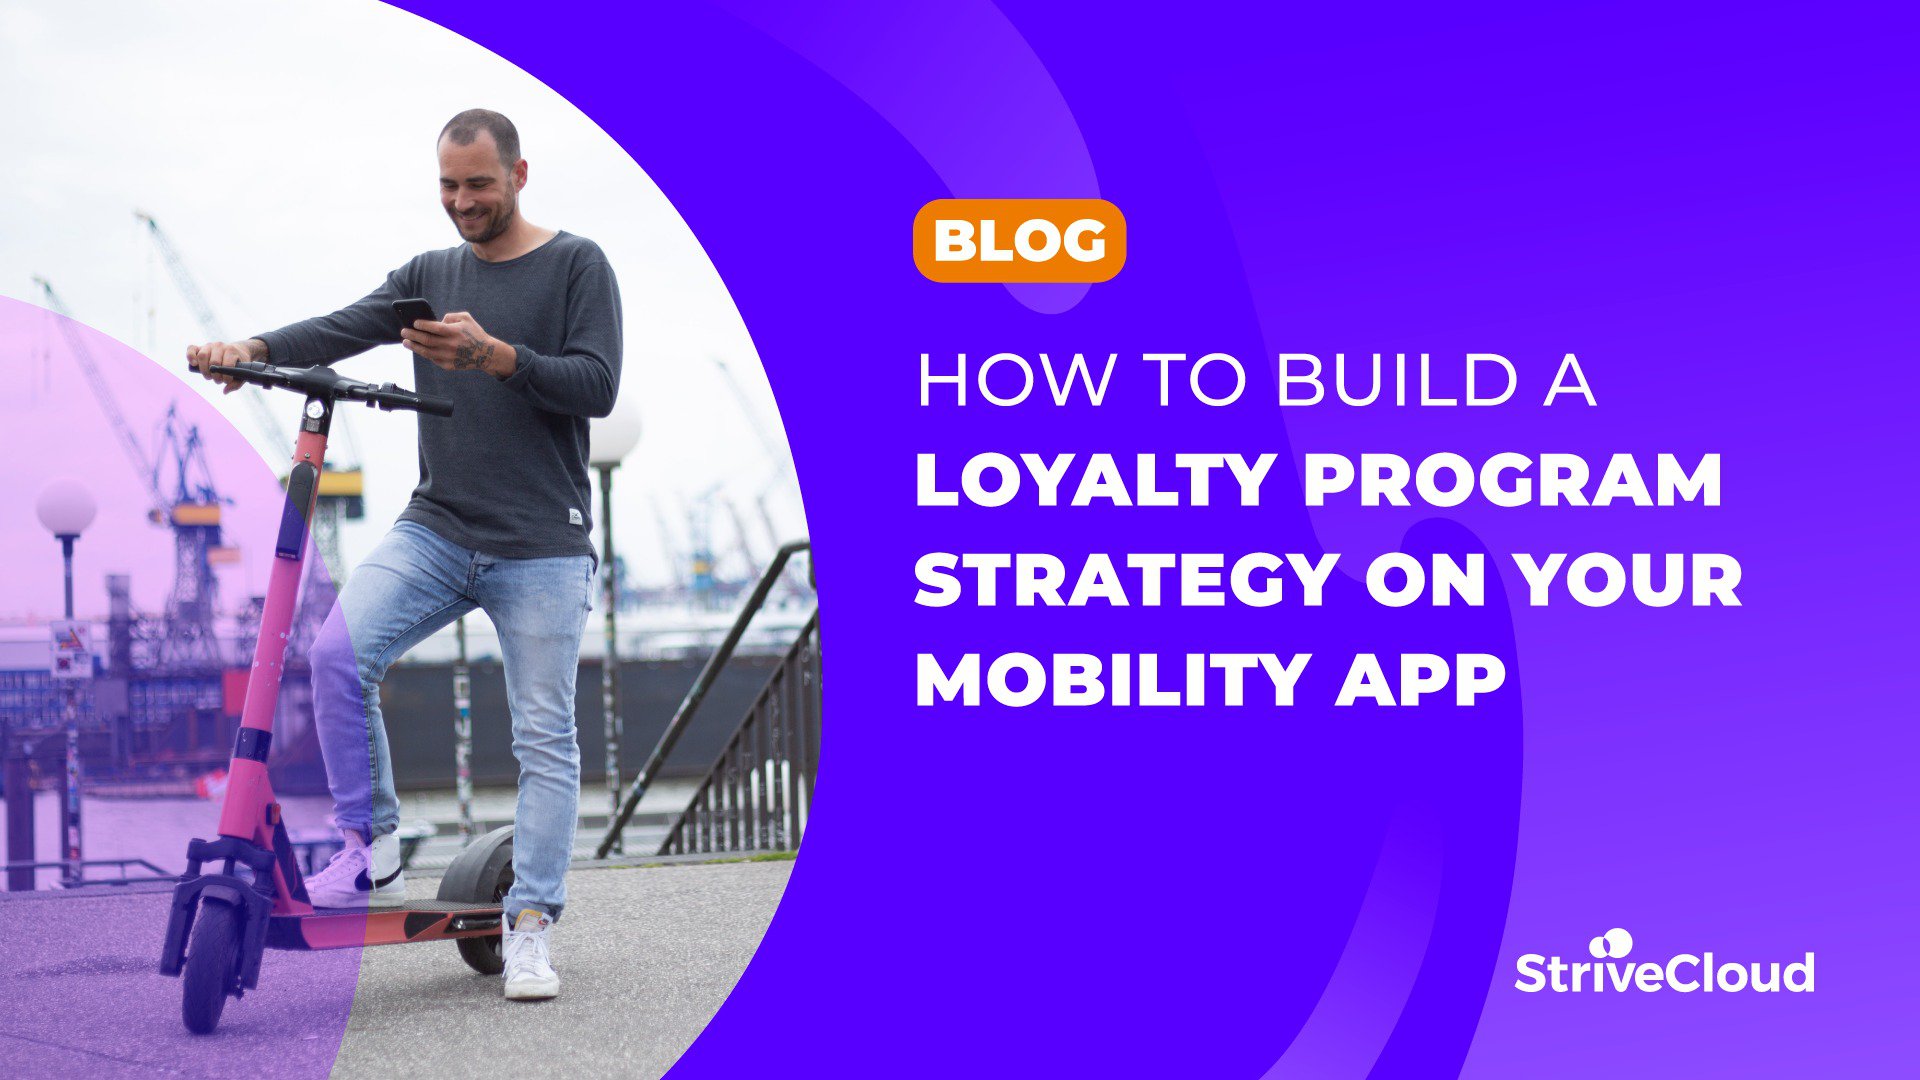 How to build a loyalty program strategy on your mobility app cover